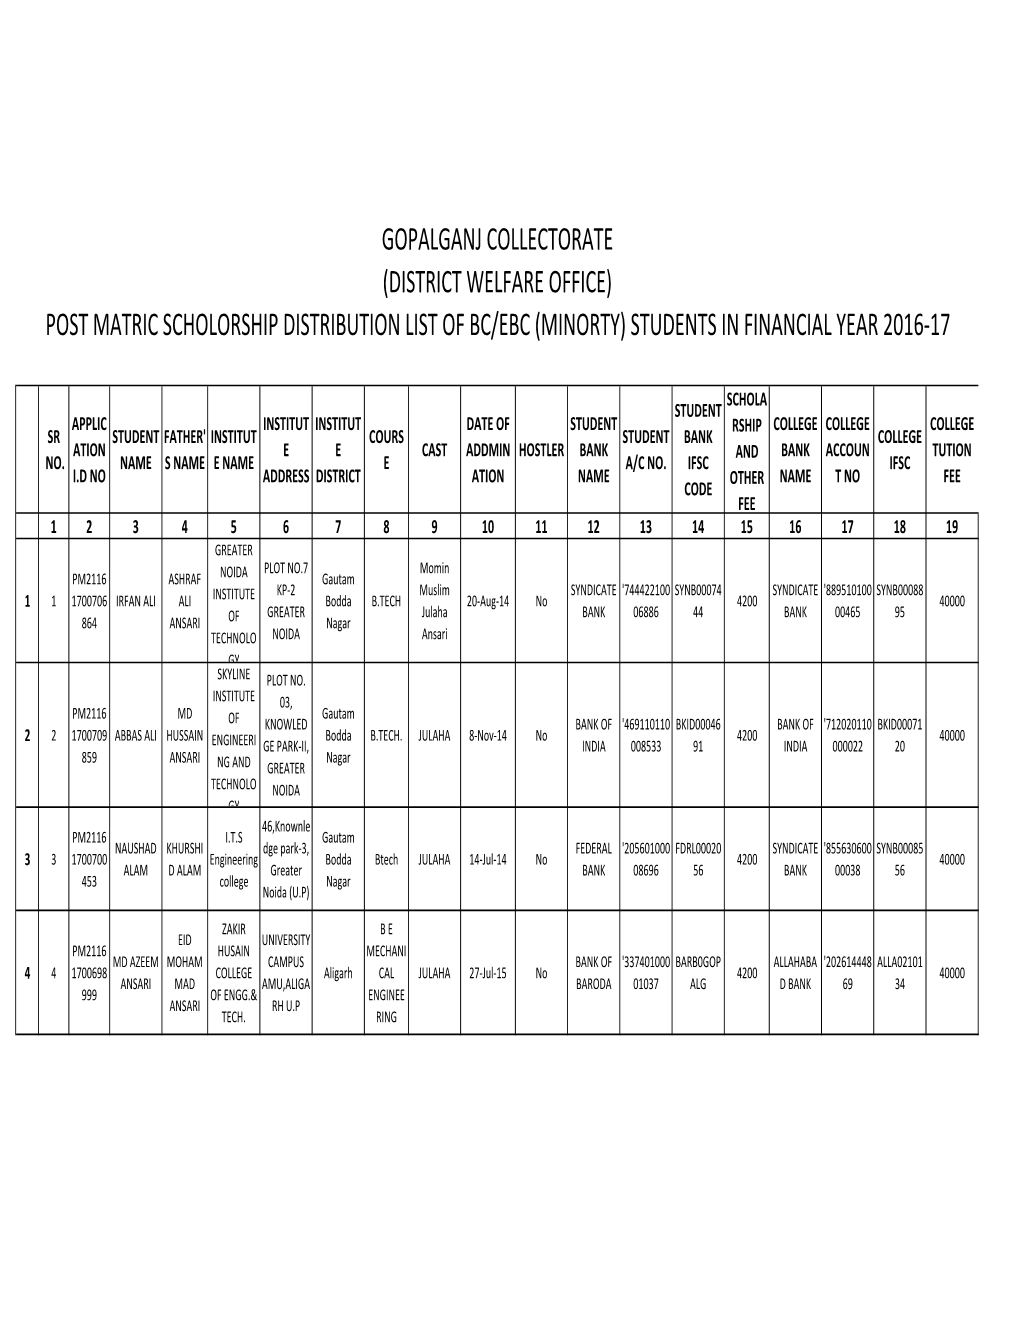 Gopalganj Collectorate (District Welfare Office) Post Matric Scholorship Distribution List of Bc/Ebc (Minorty) Students in Financial Year 2016-17